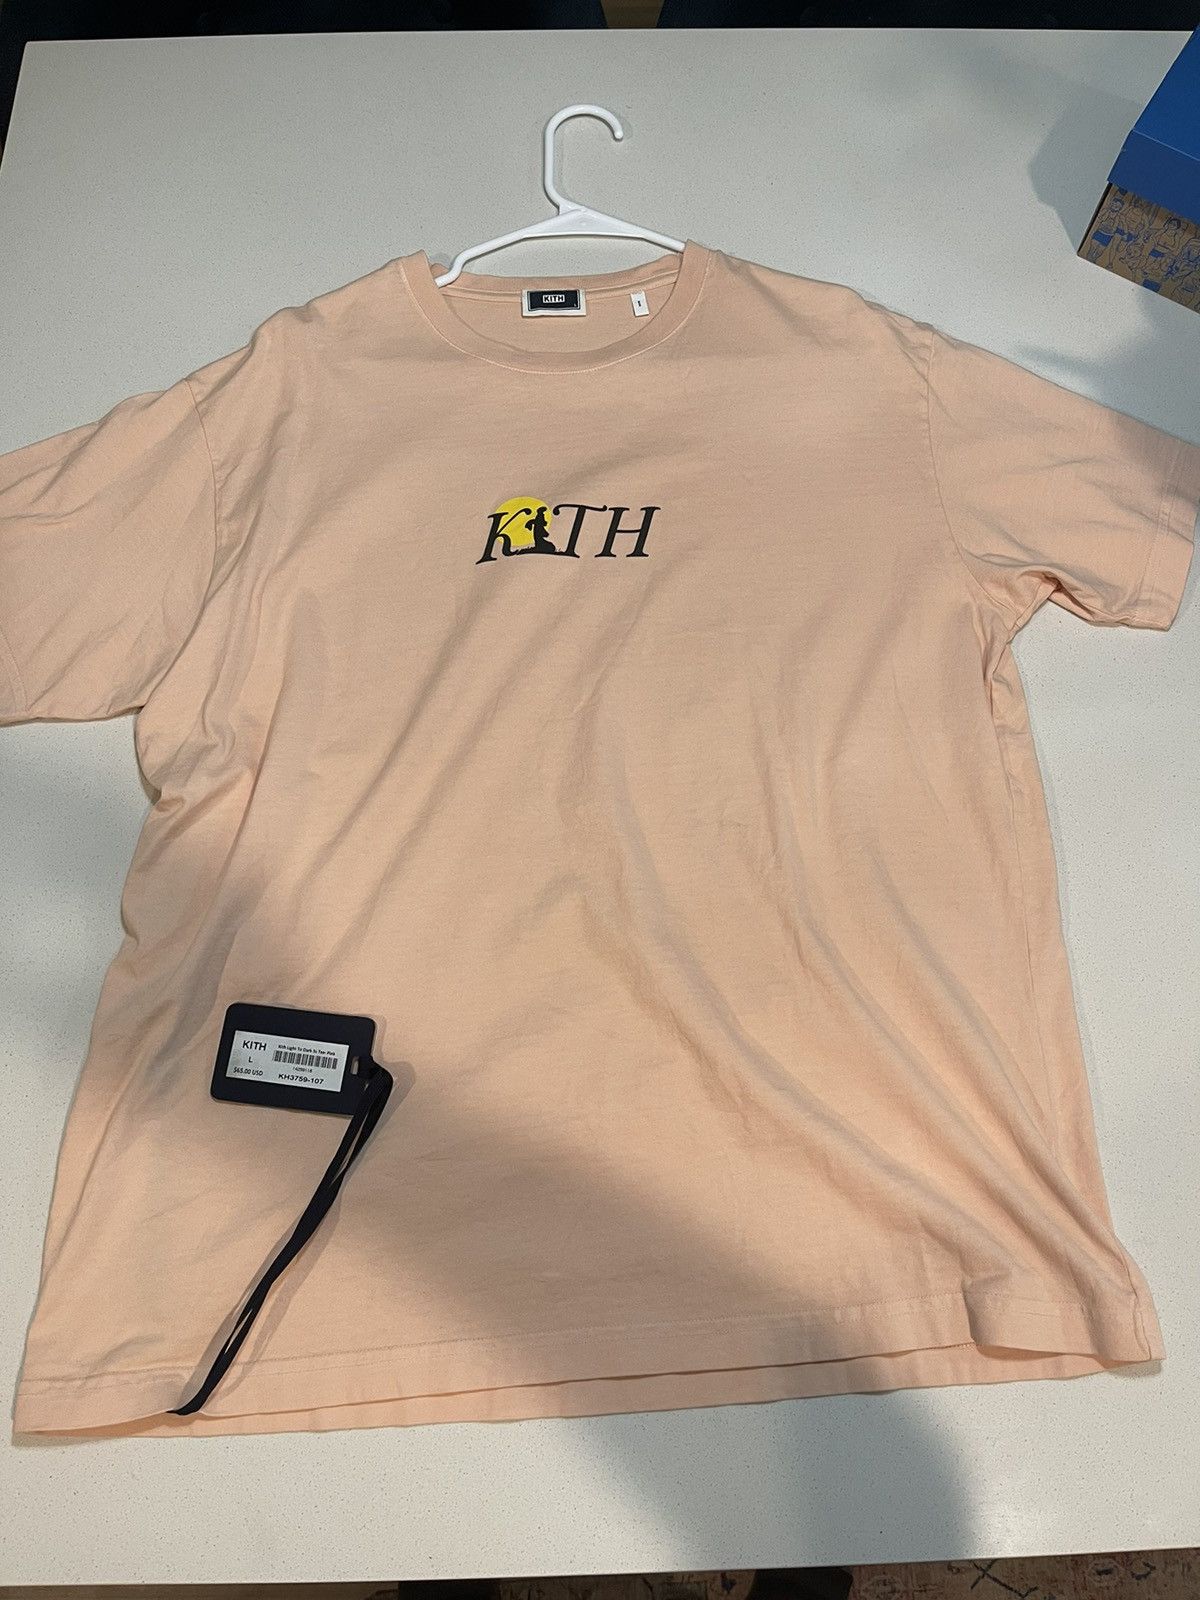 shop outlet online Kith Light To Dark Shirt | www.fcbsudan.com